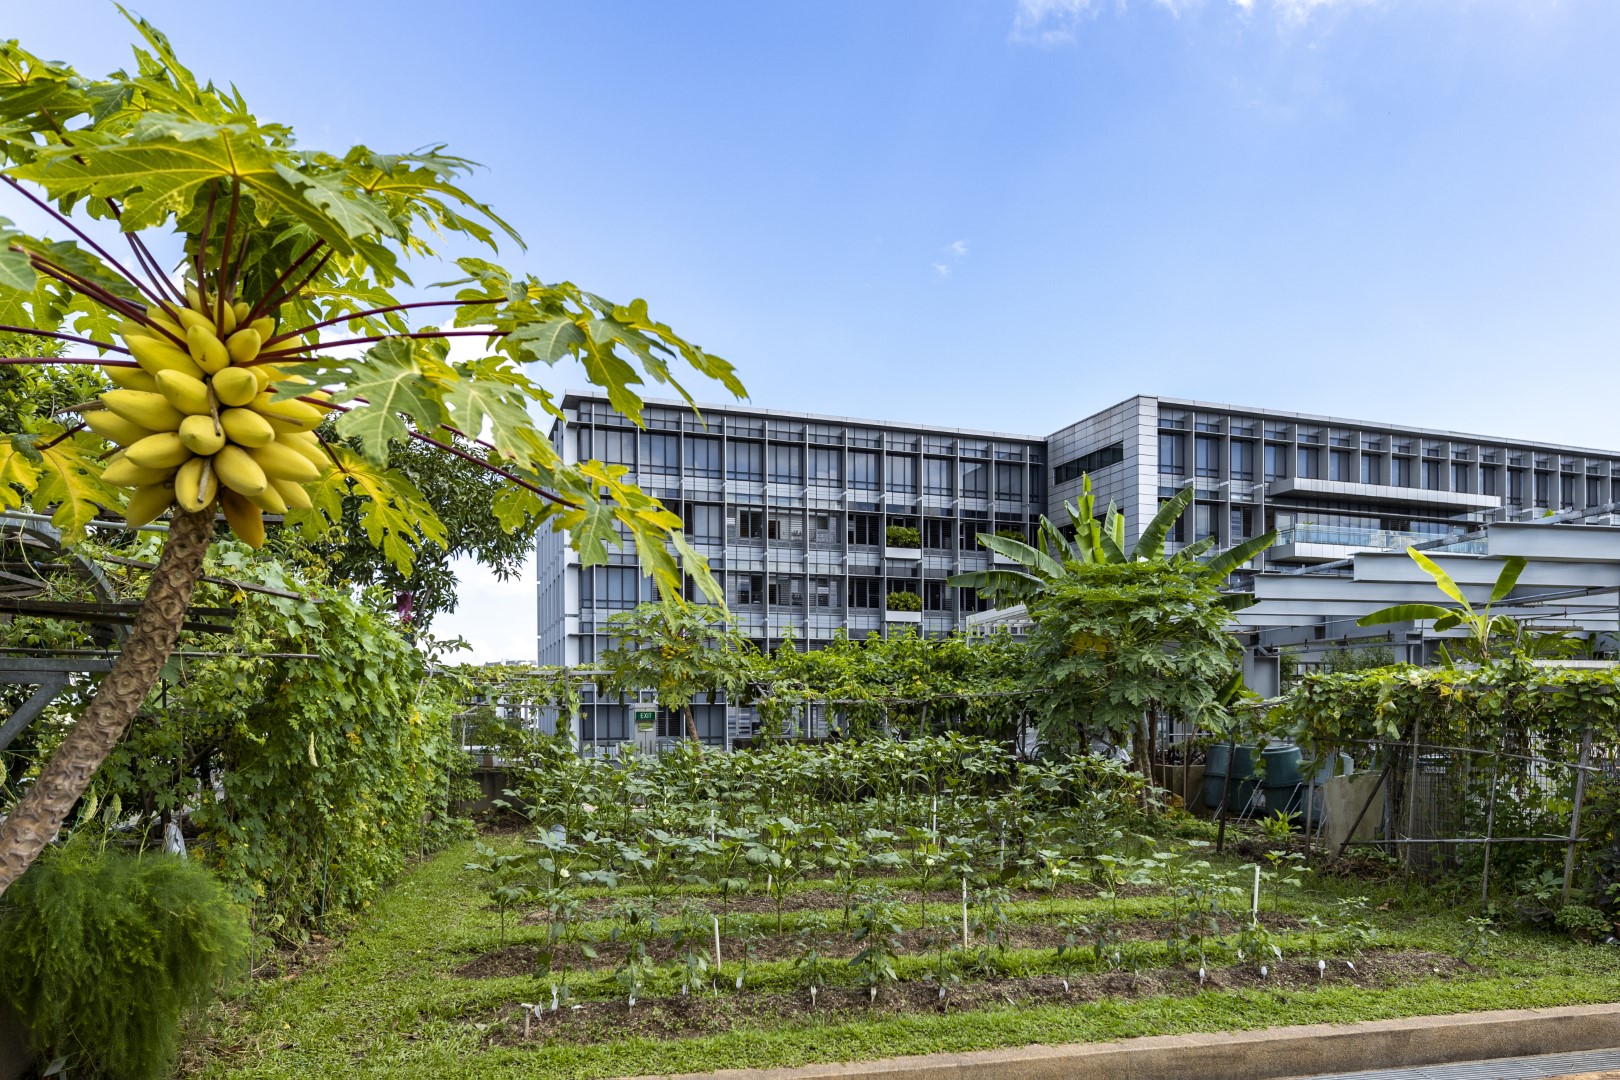 This urban farming area in Khoo Teck Puat Hospital promotes healing and wellness in the community